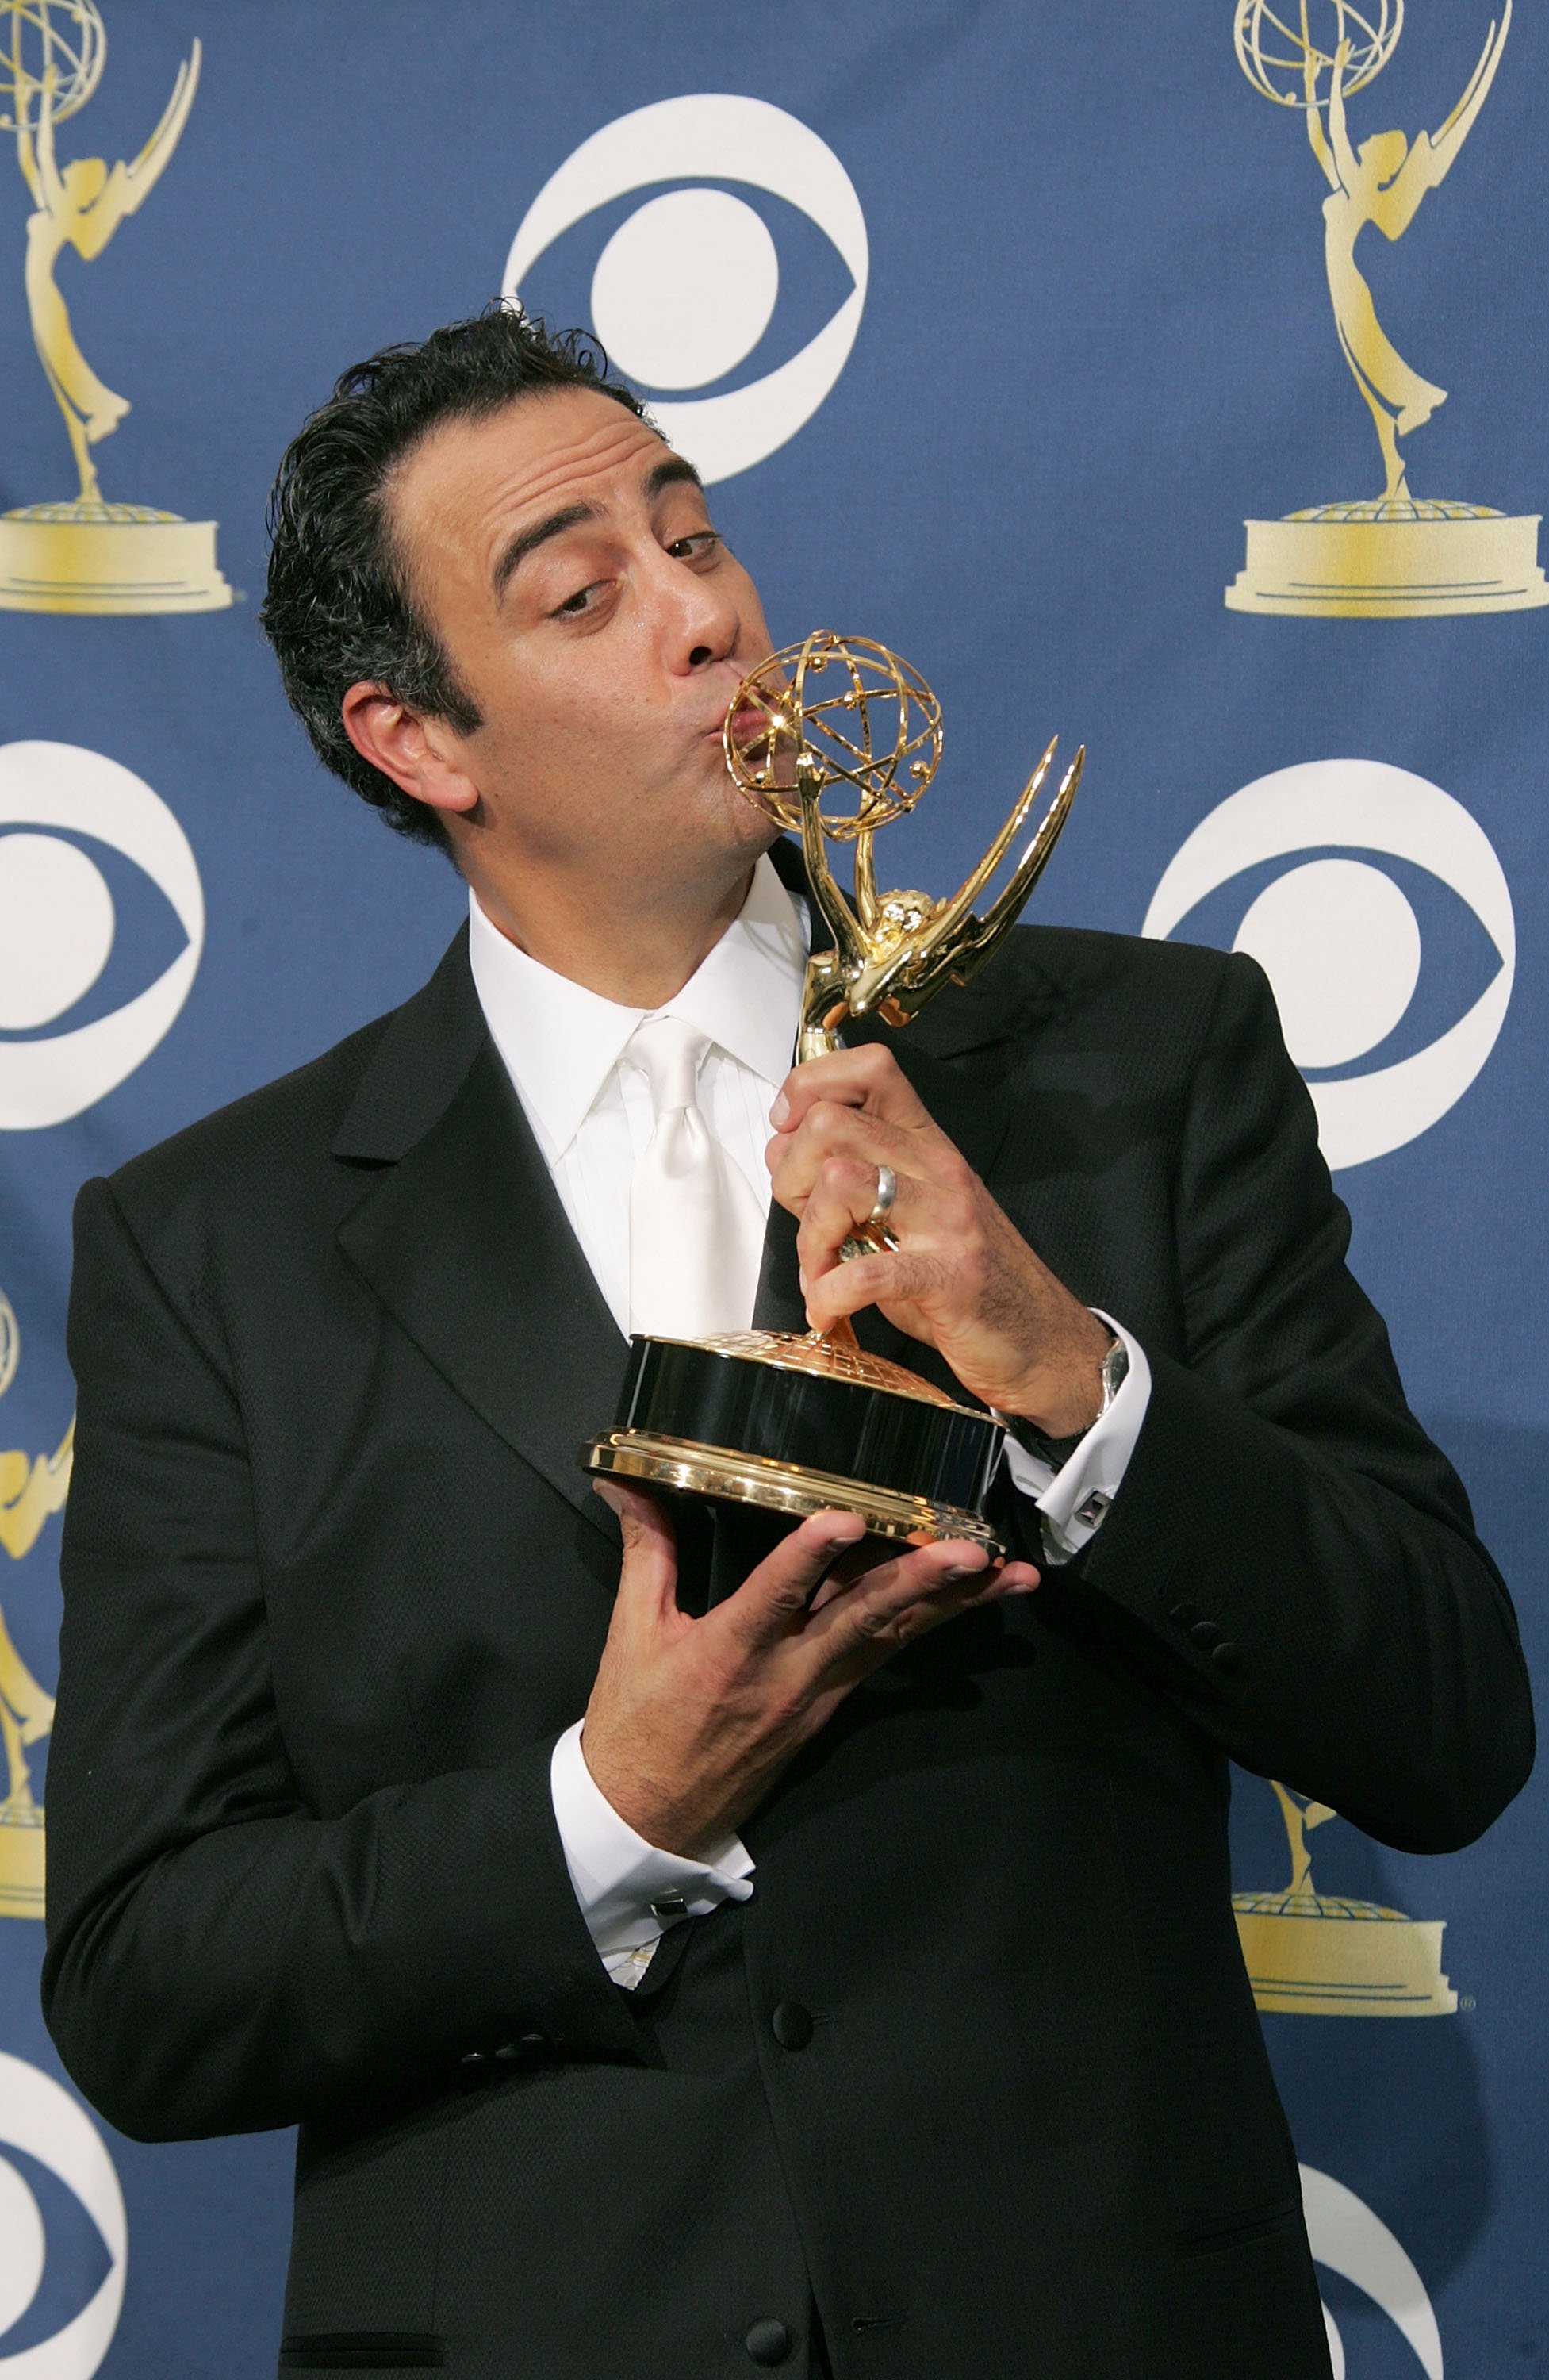 Brad Garrett with his 2005 Emmy award for his performance as Robert Barone in 'Everybody Loves Raymond'